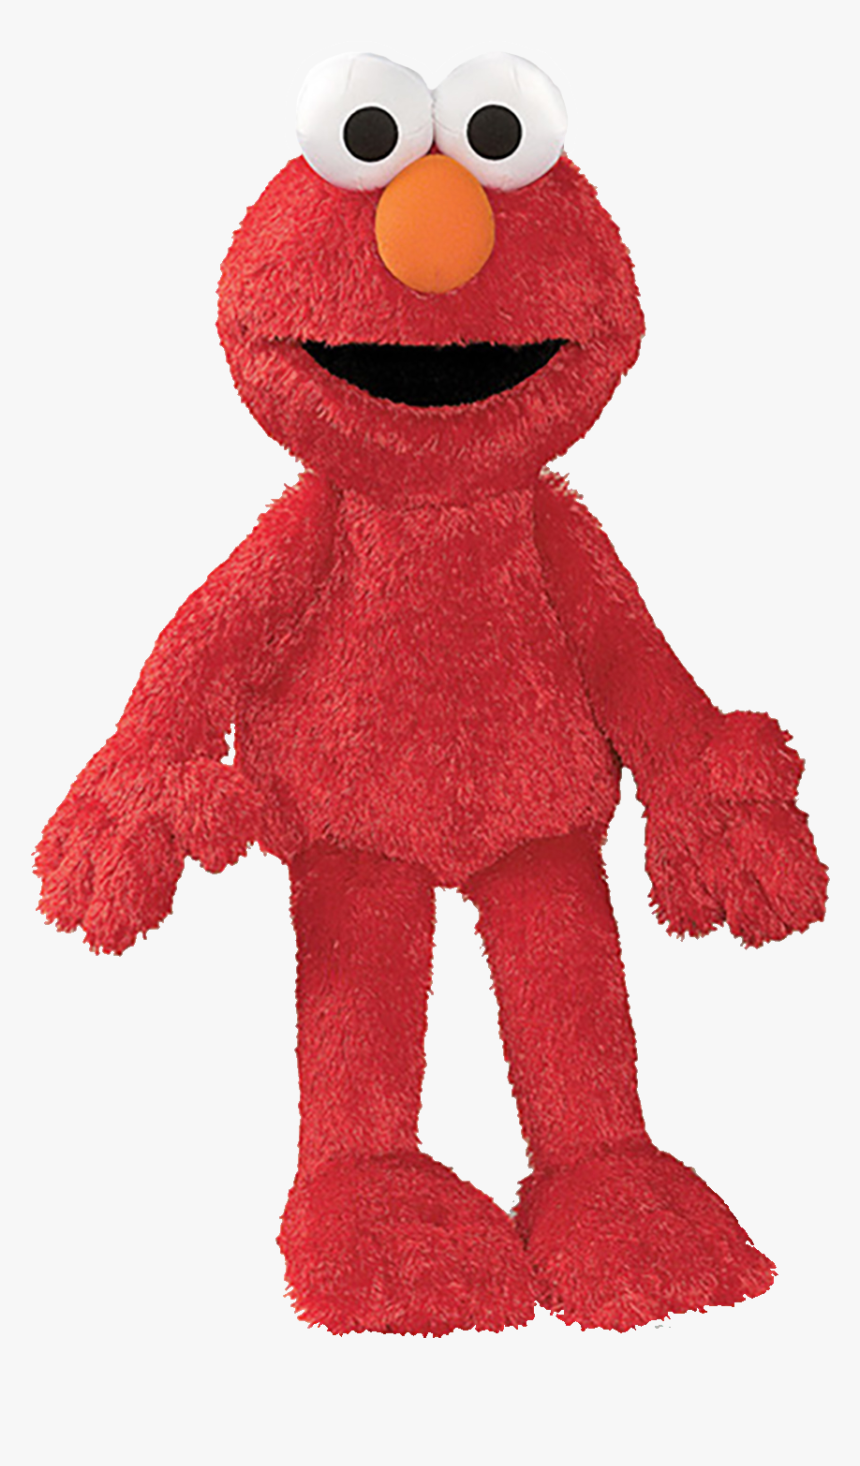 Anthonythepepsifan Roblox Wikia Sesame Street Elmo Plush Toy Hd Png Download Kindpng - $.$ face in roblox wikia